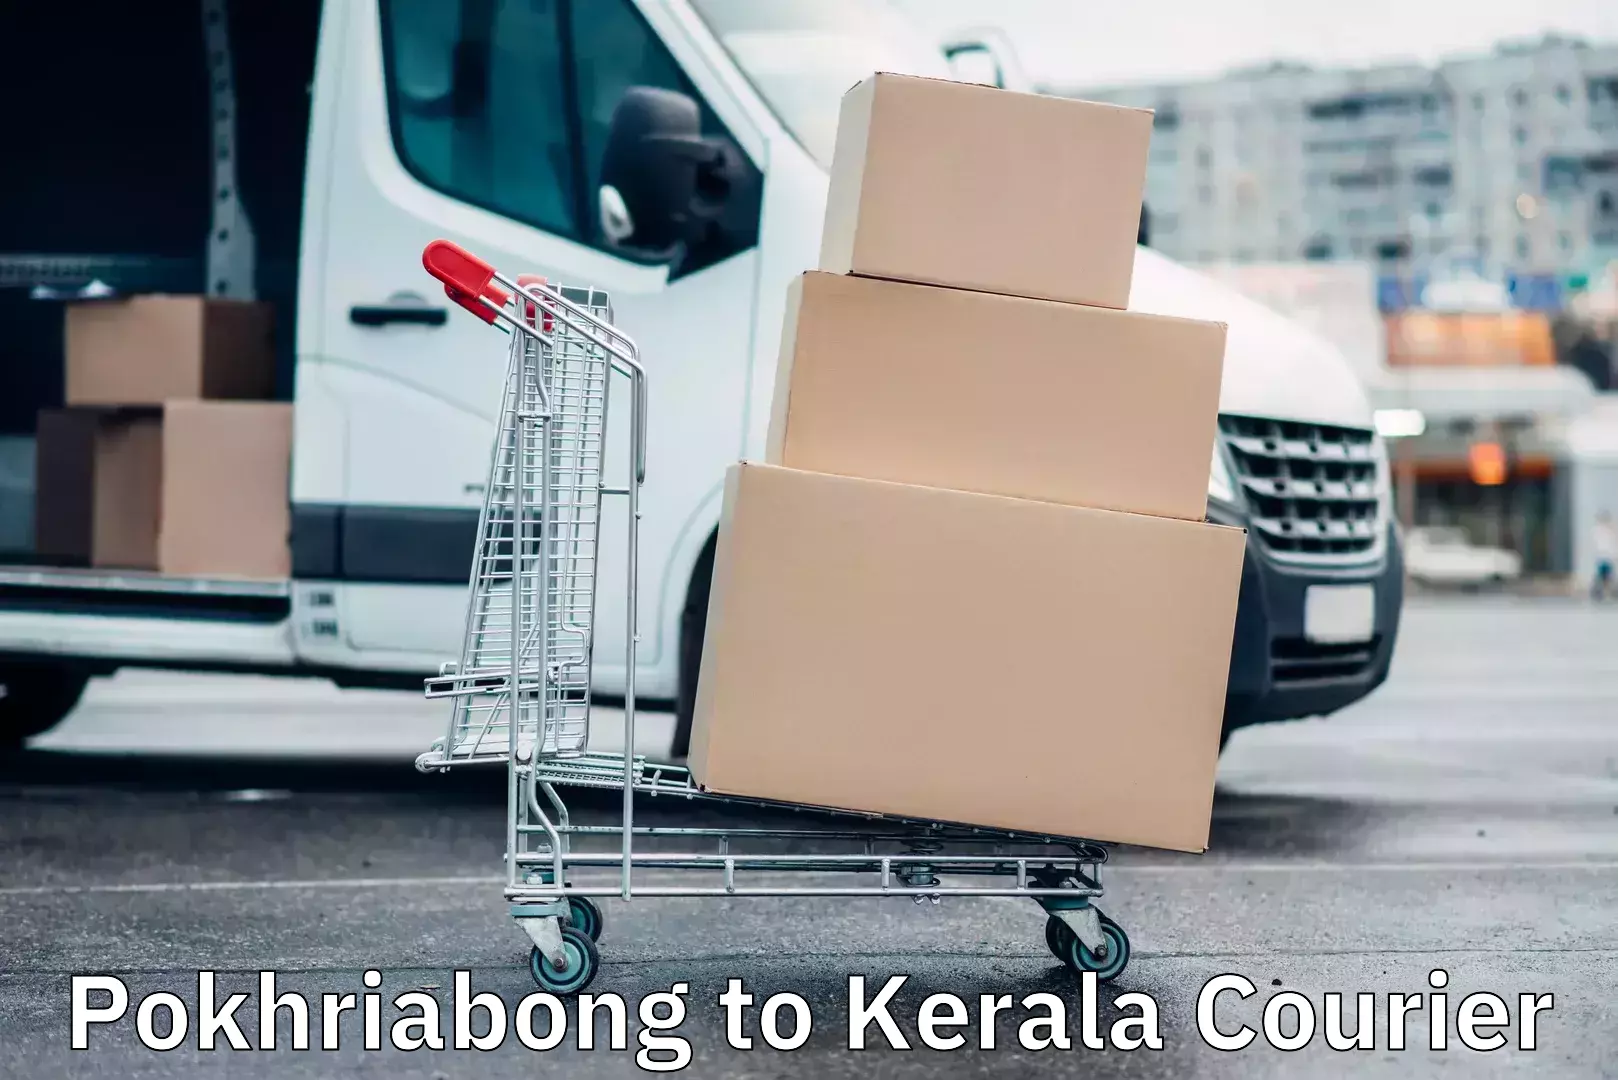 User-friendly delivery service in Pokhriabong to Kerala